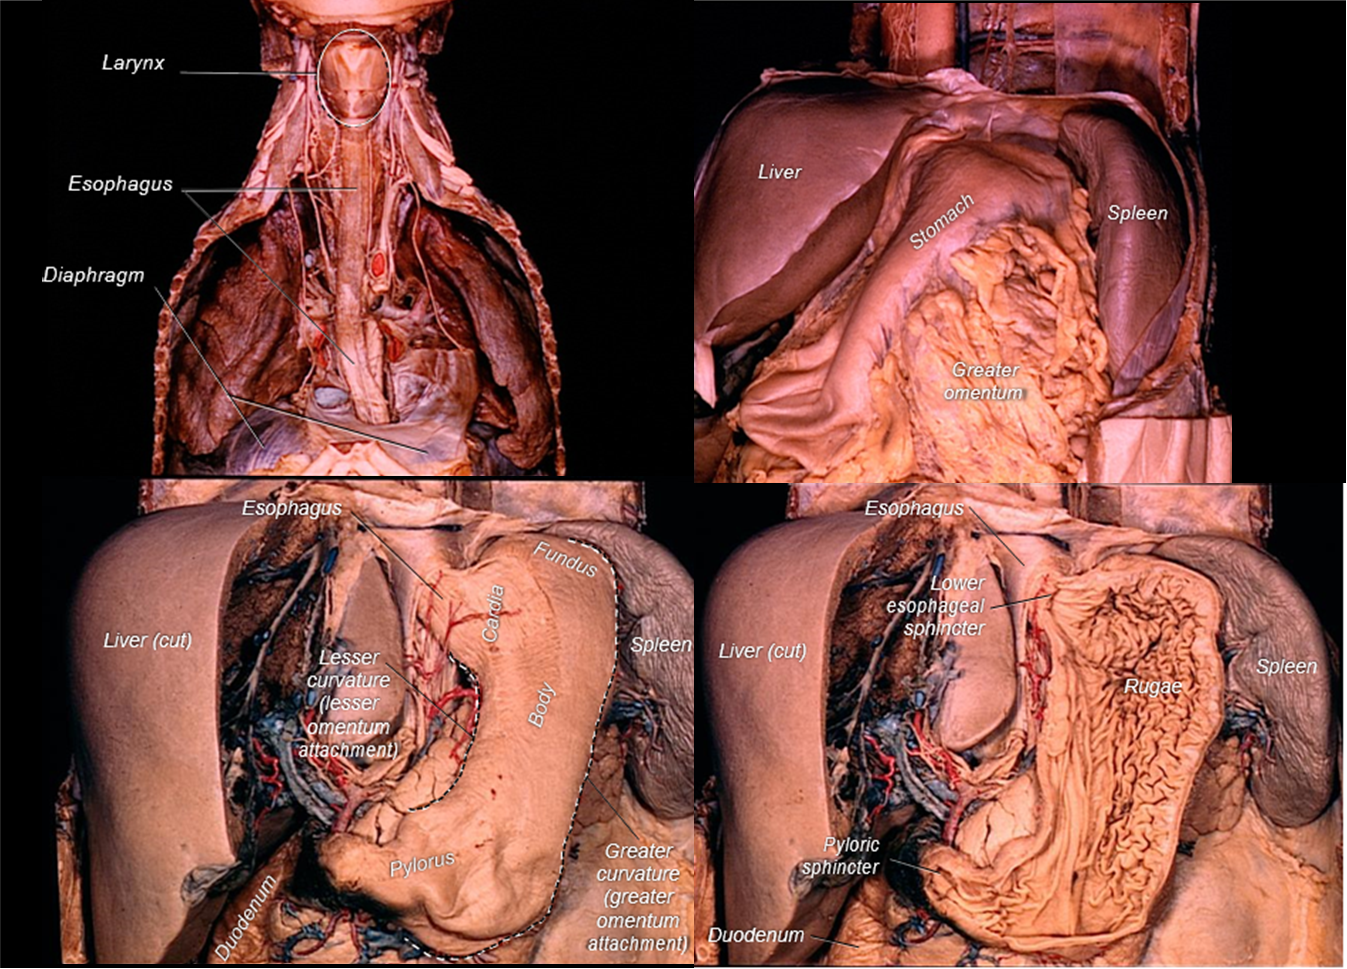 Cadaver images of stomach and esophagus